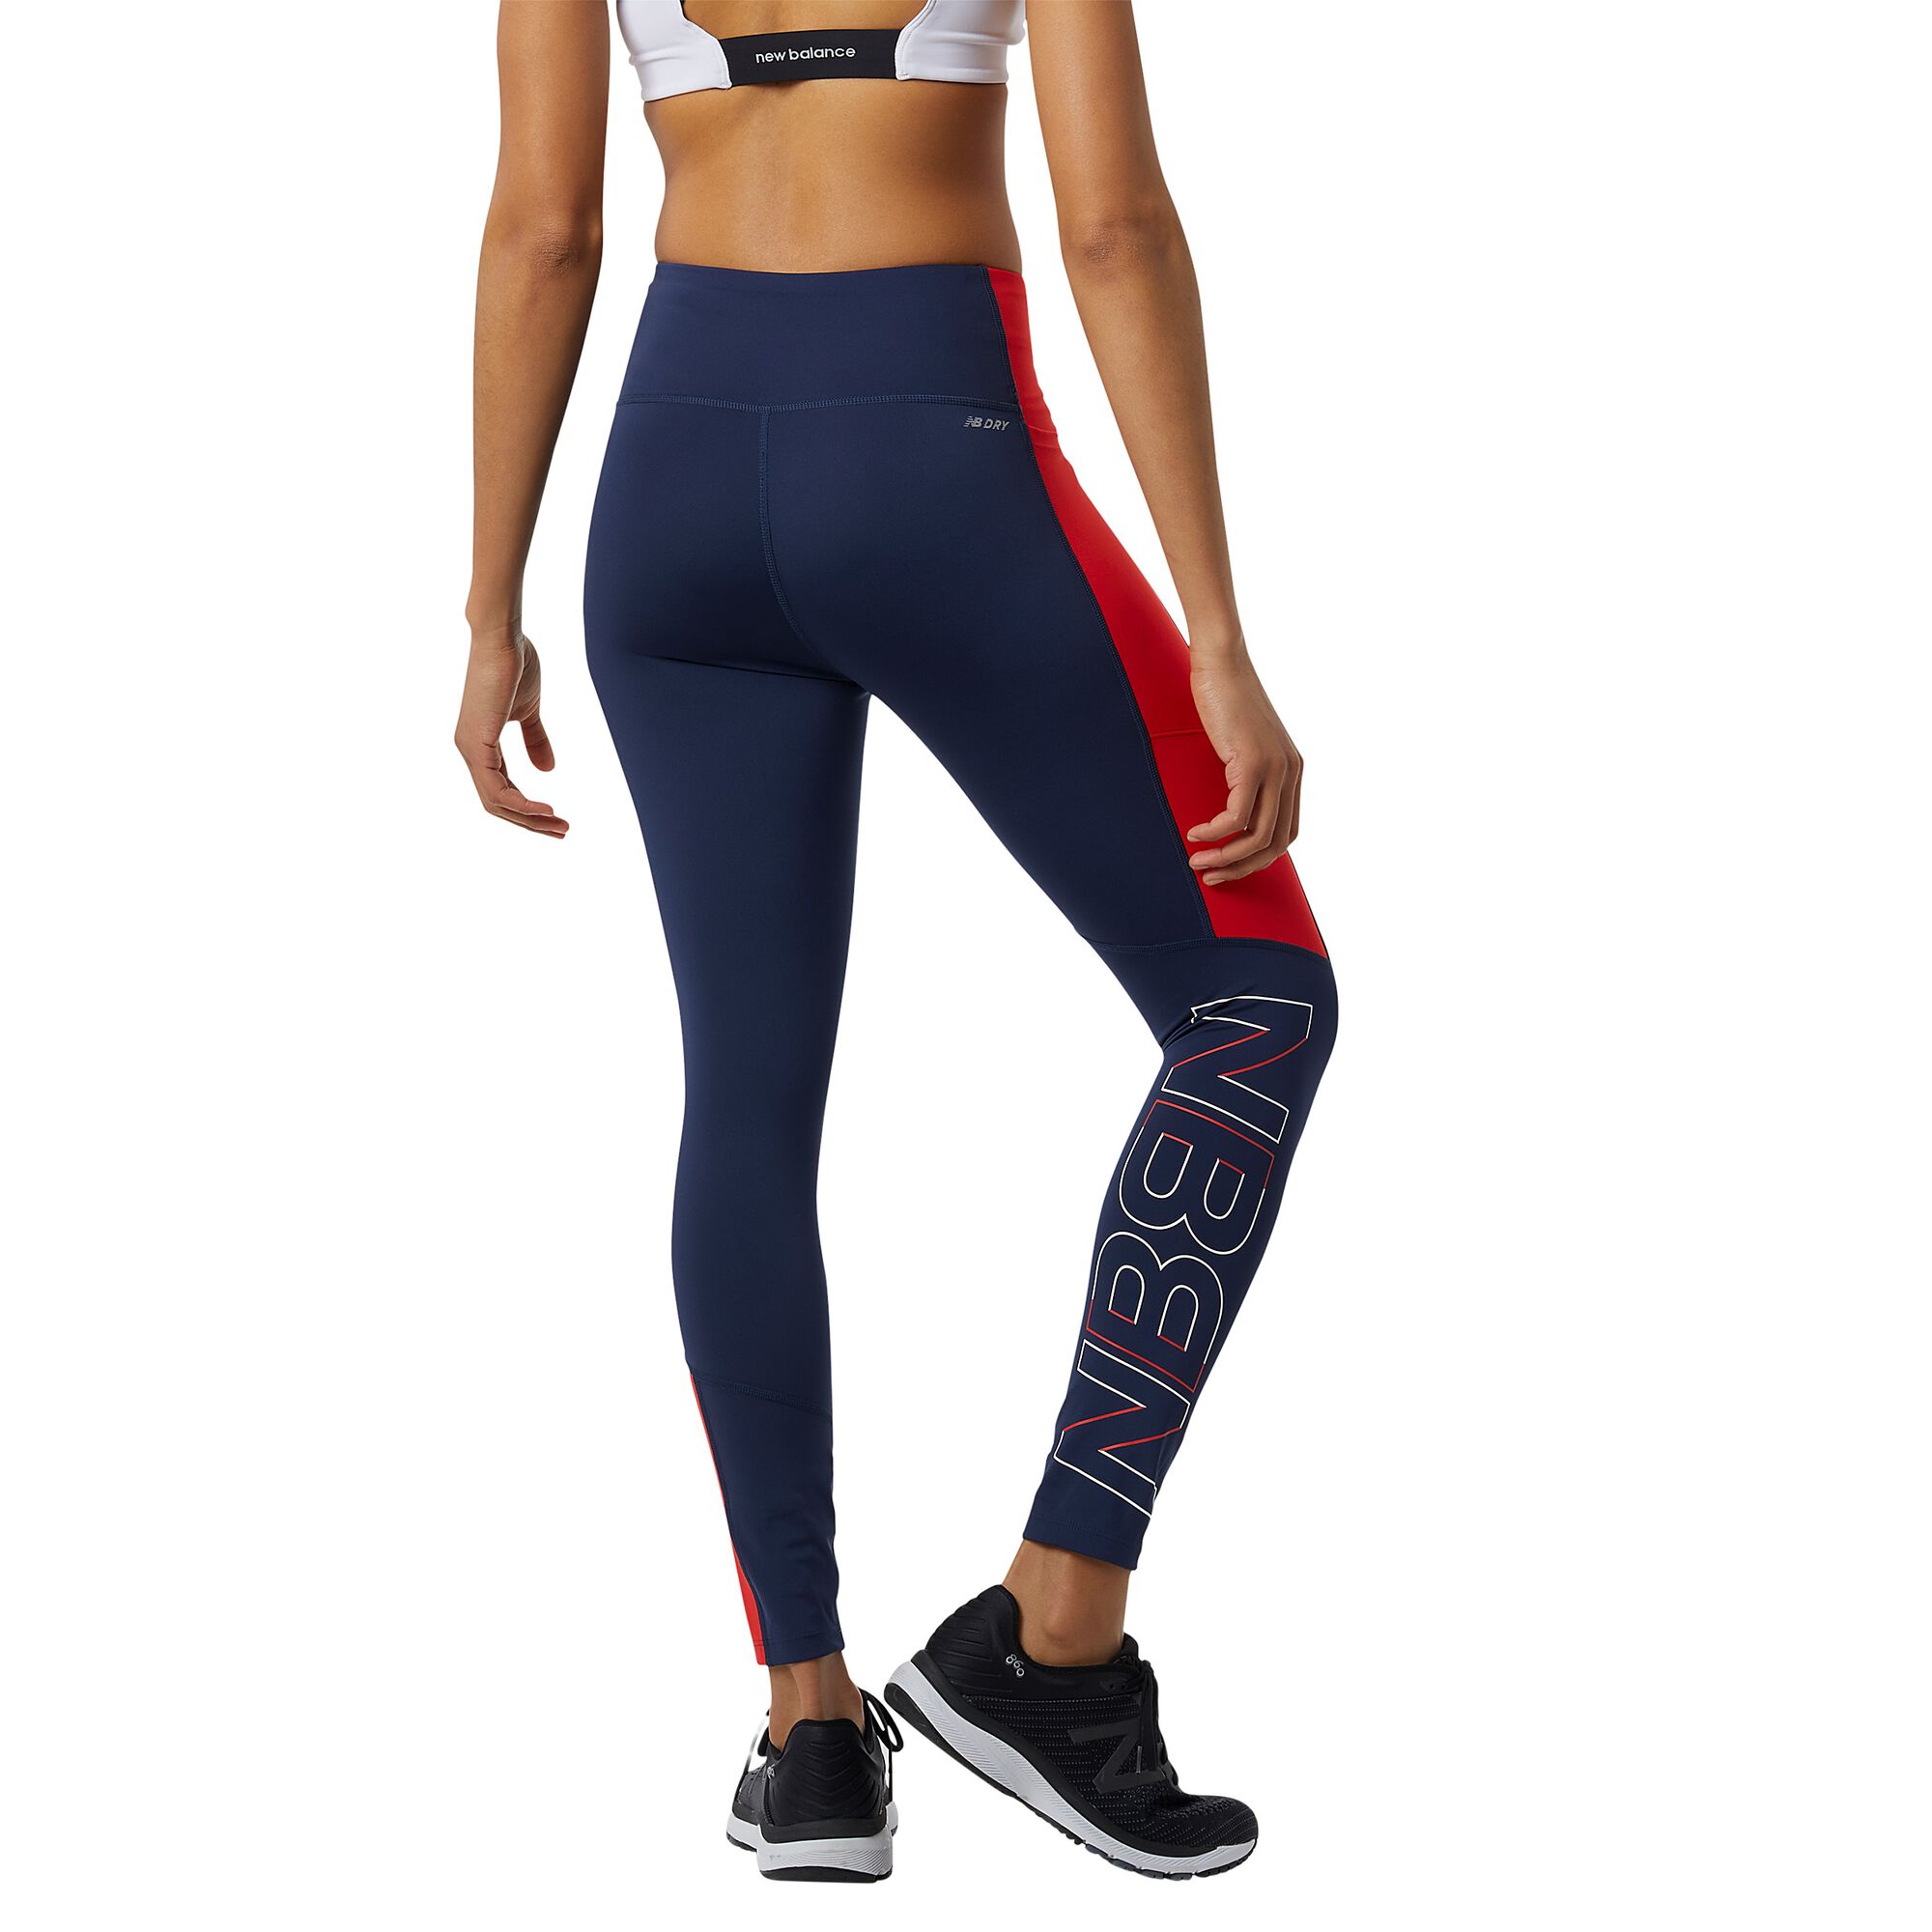 Women | Buy Point Blue 7/8 COM Tight Accelerate New online Balance Pacer Running